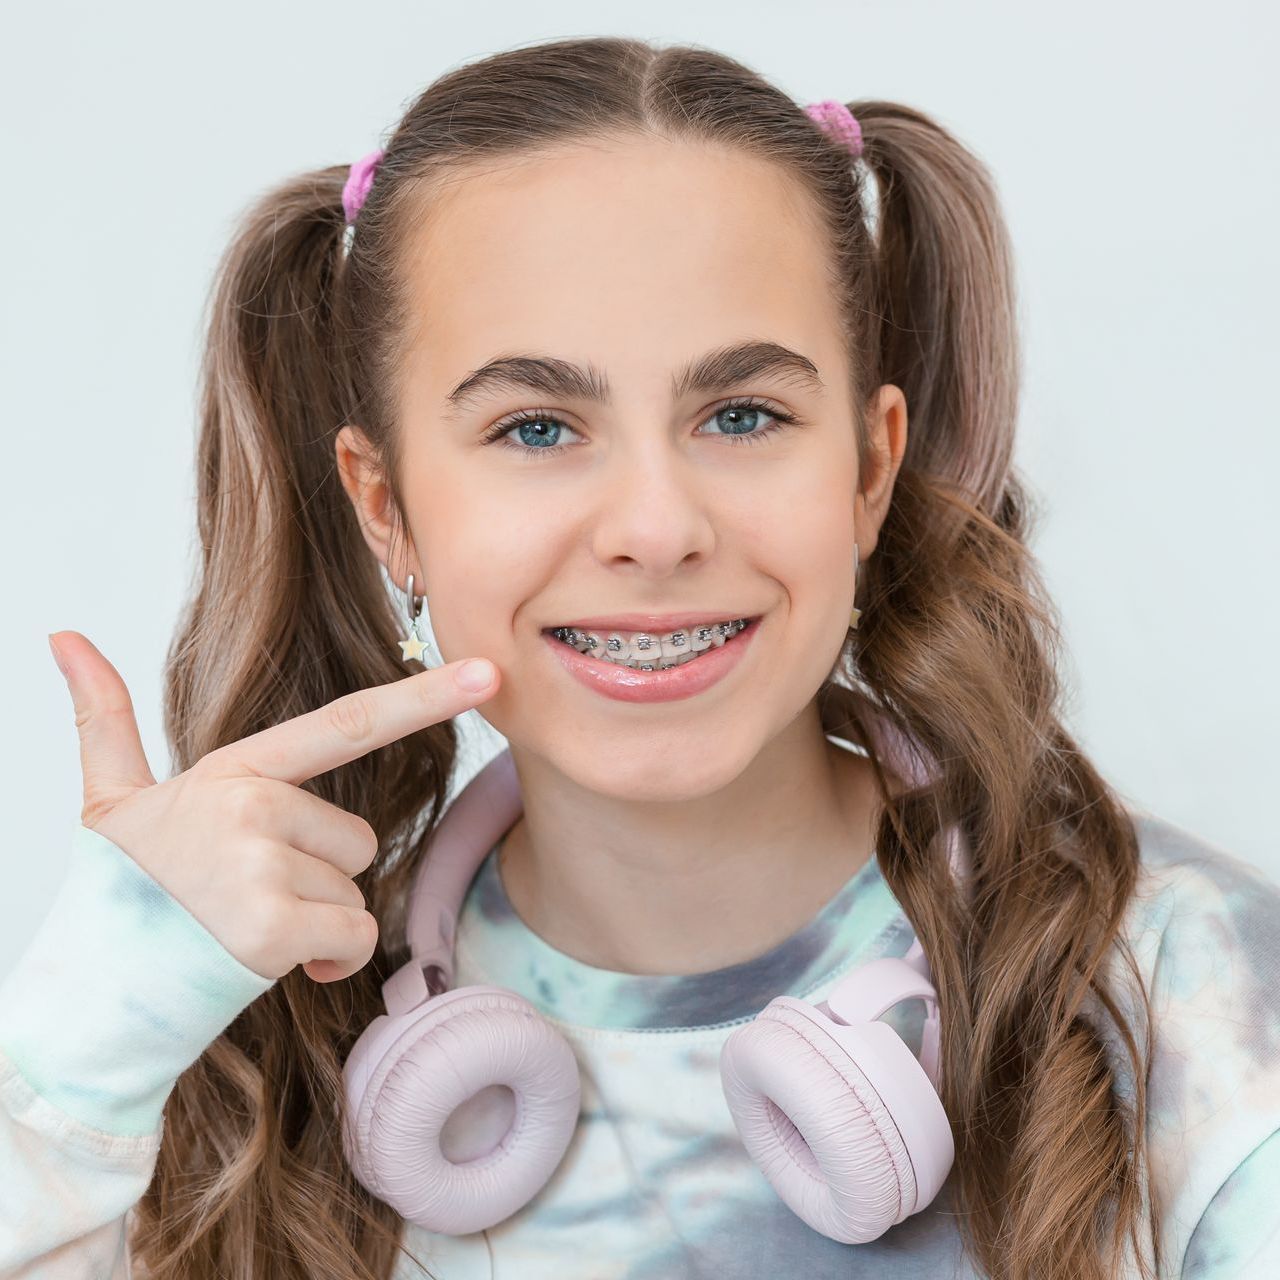 A young girl wearing braces and headphones is smiling and giving a thumbs up.